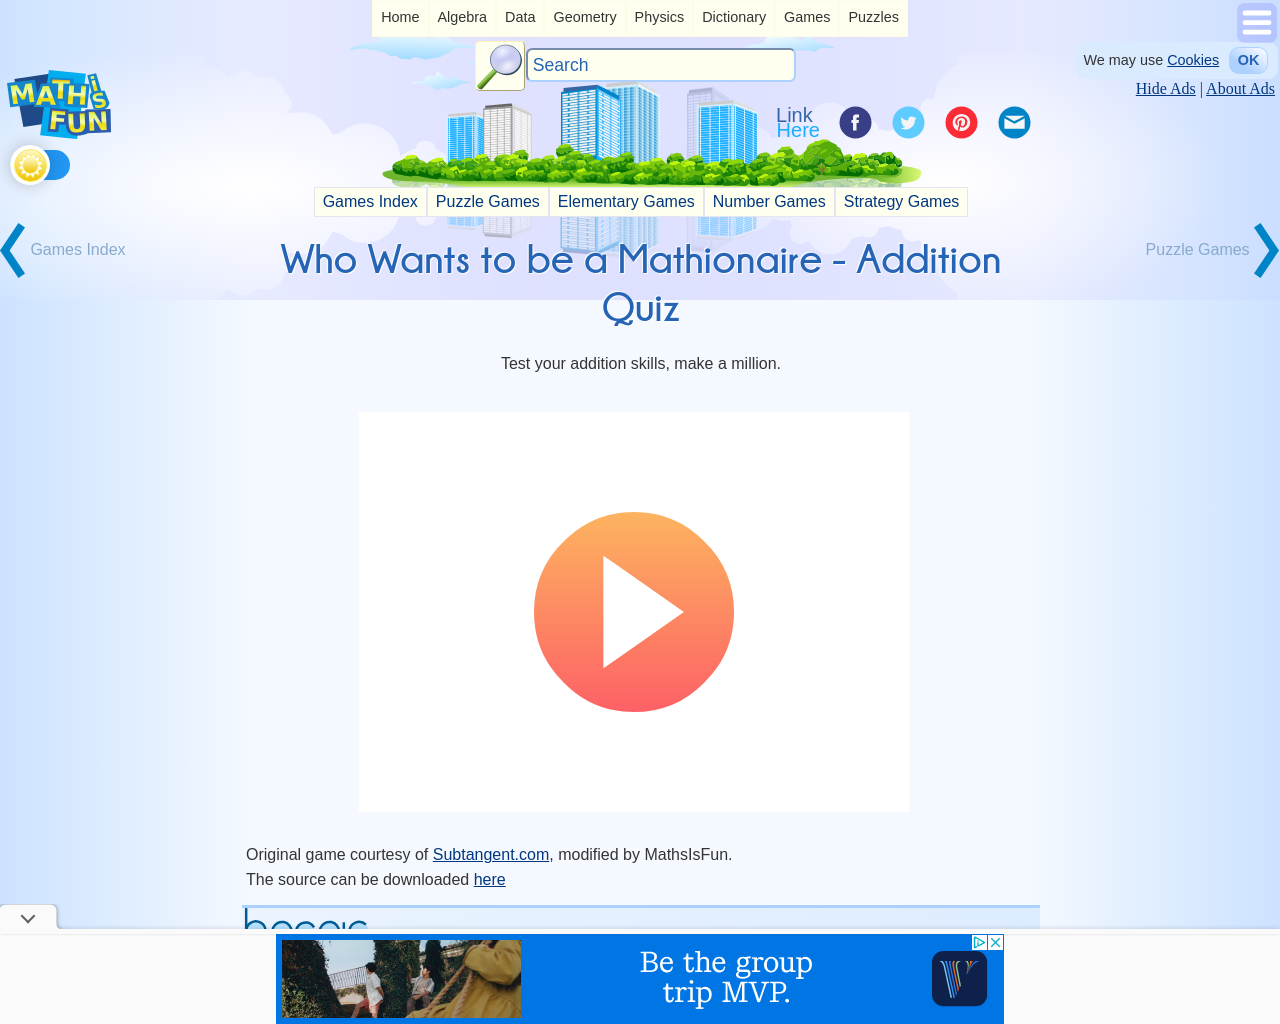 Who Wants to be a Mathionaire - Addition Quiz